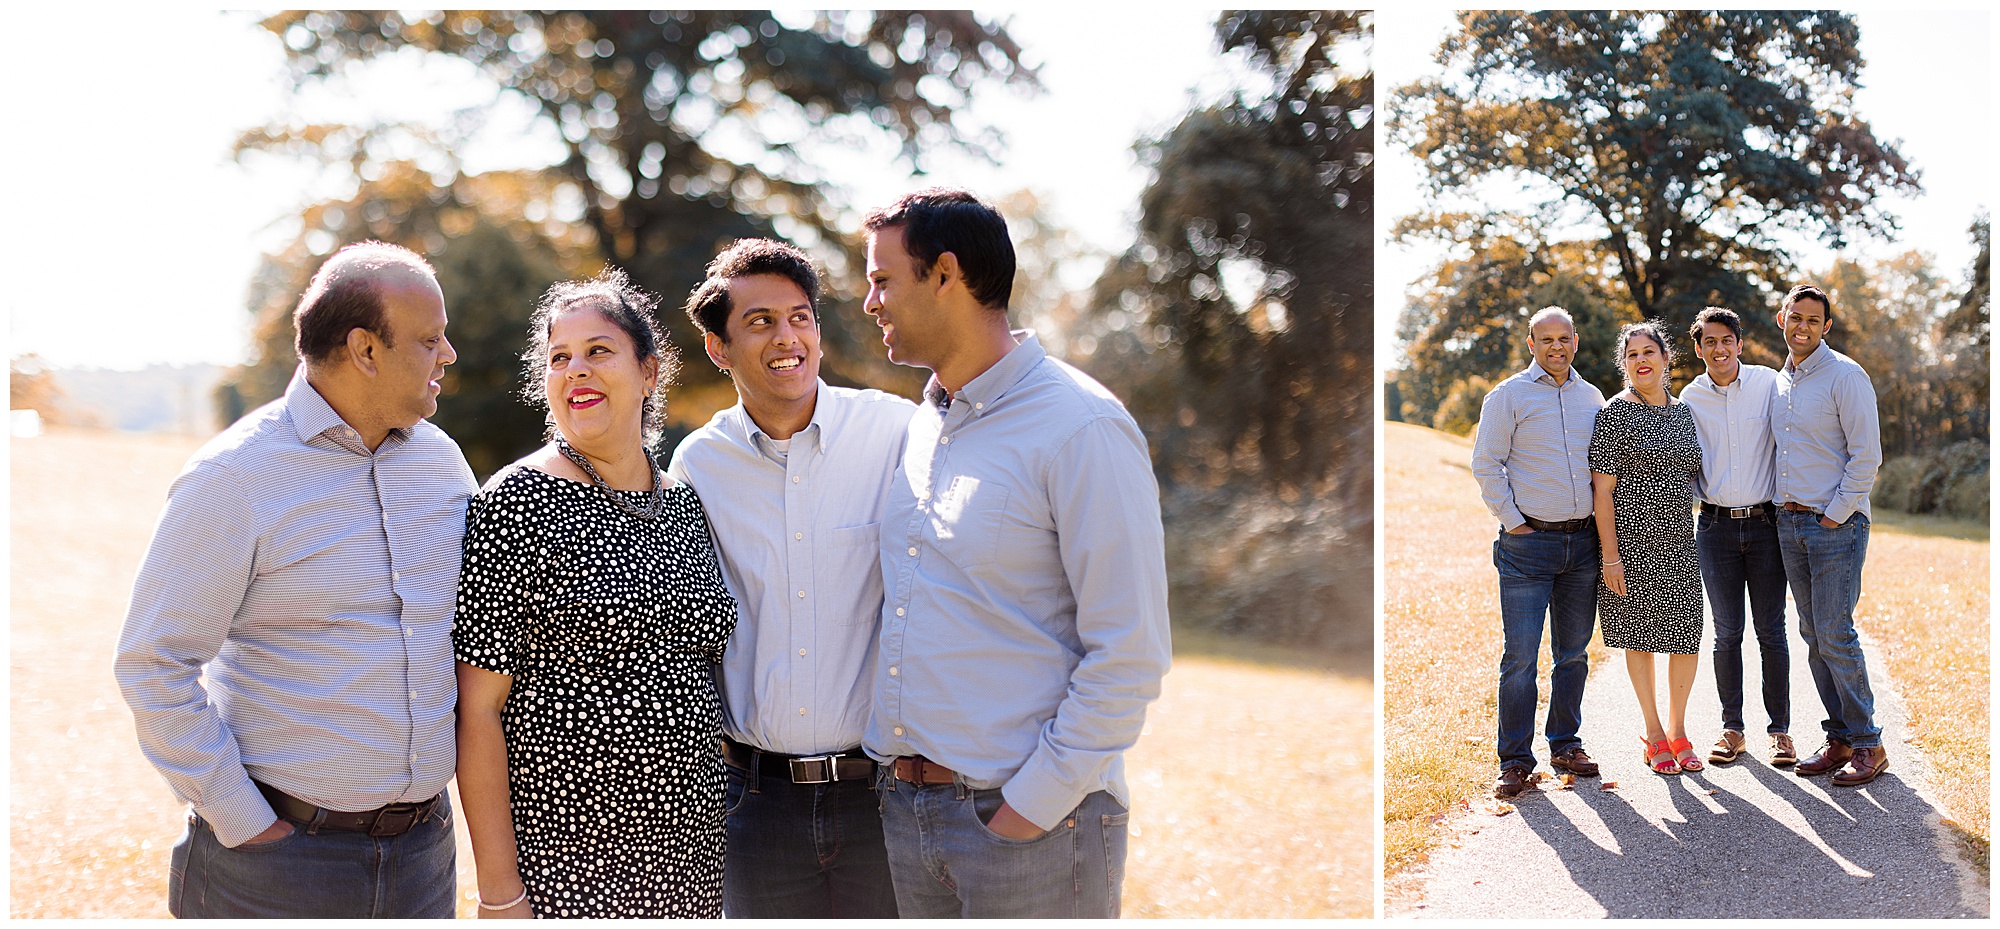 Whimsical family photography in Tarrytown, NY